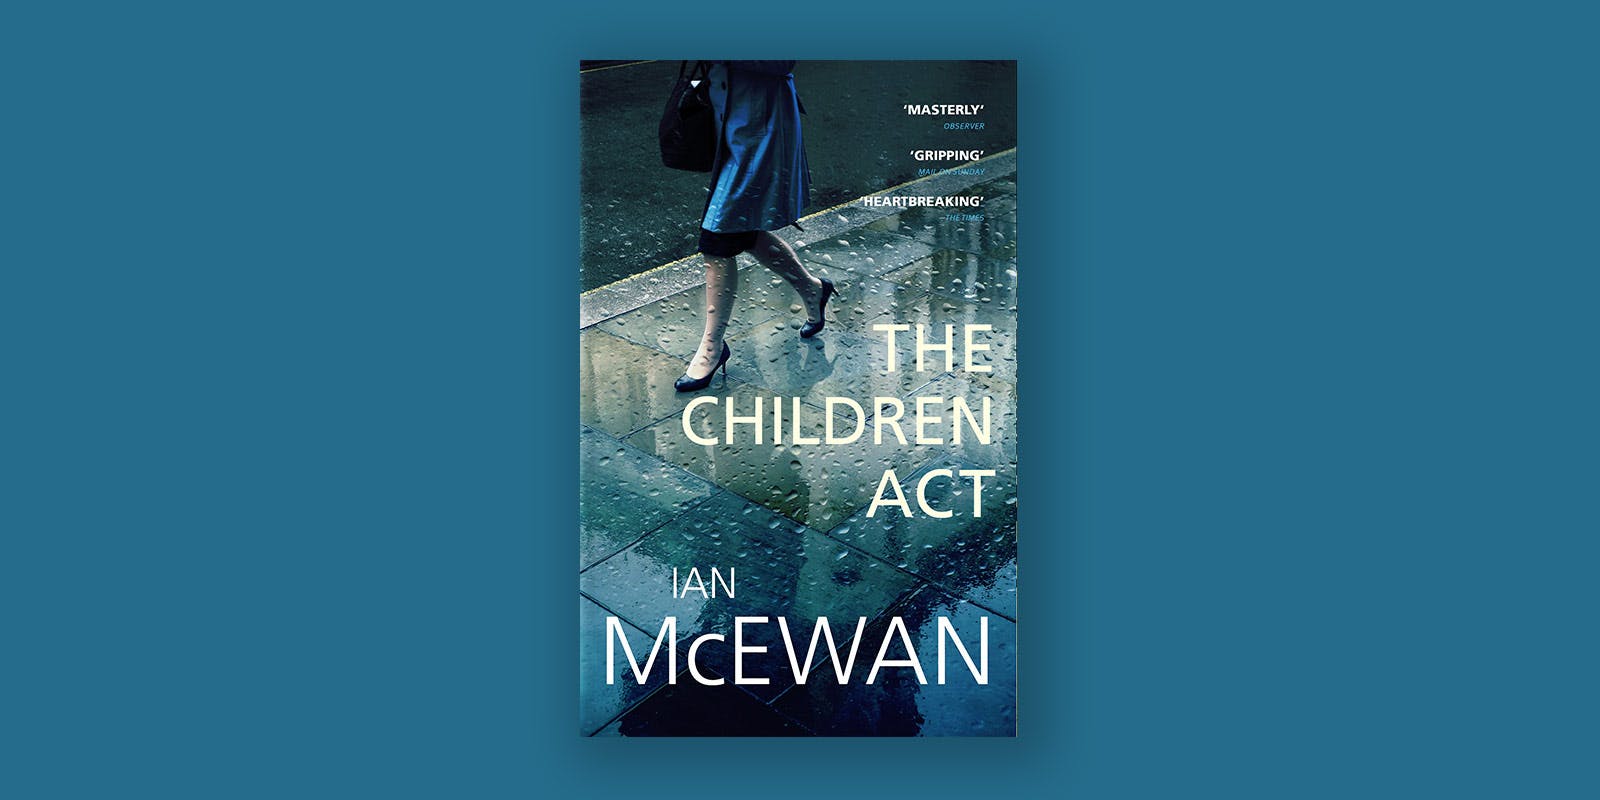 The Children Act book club notes